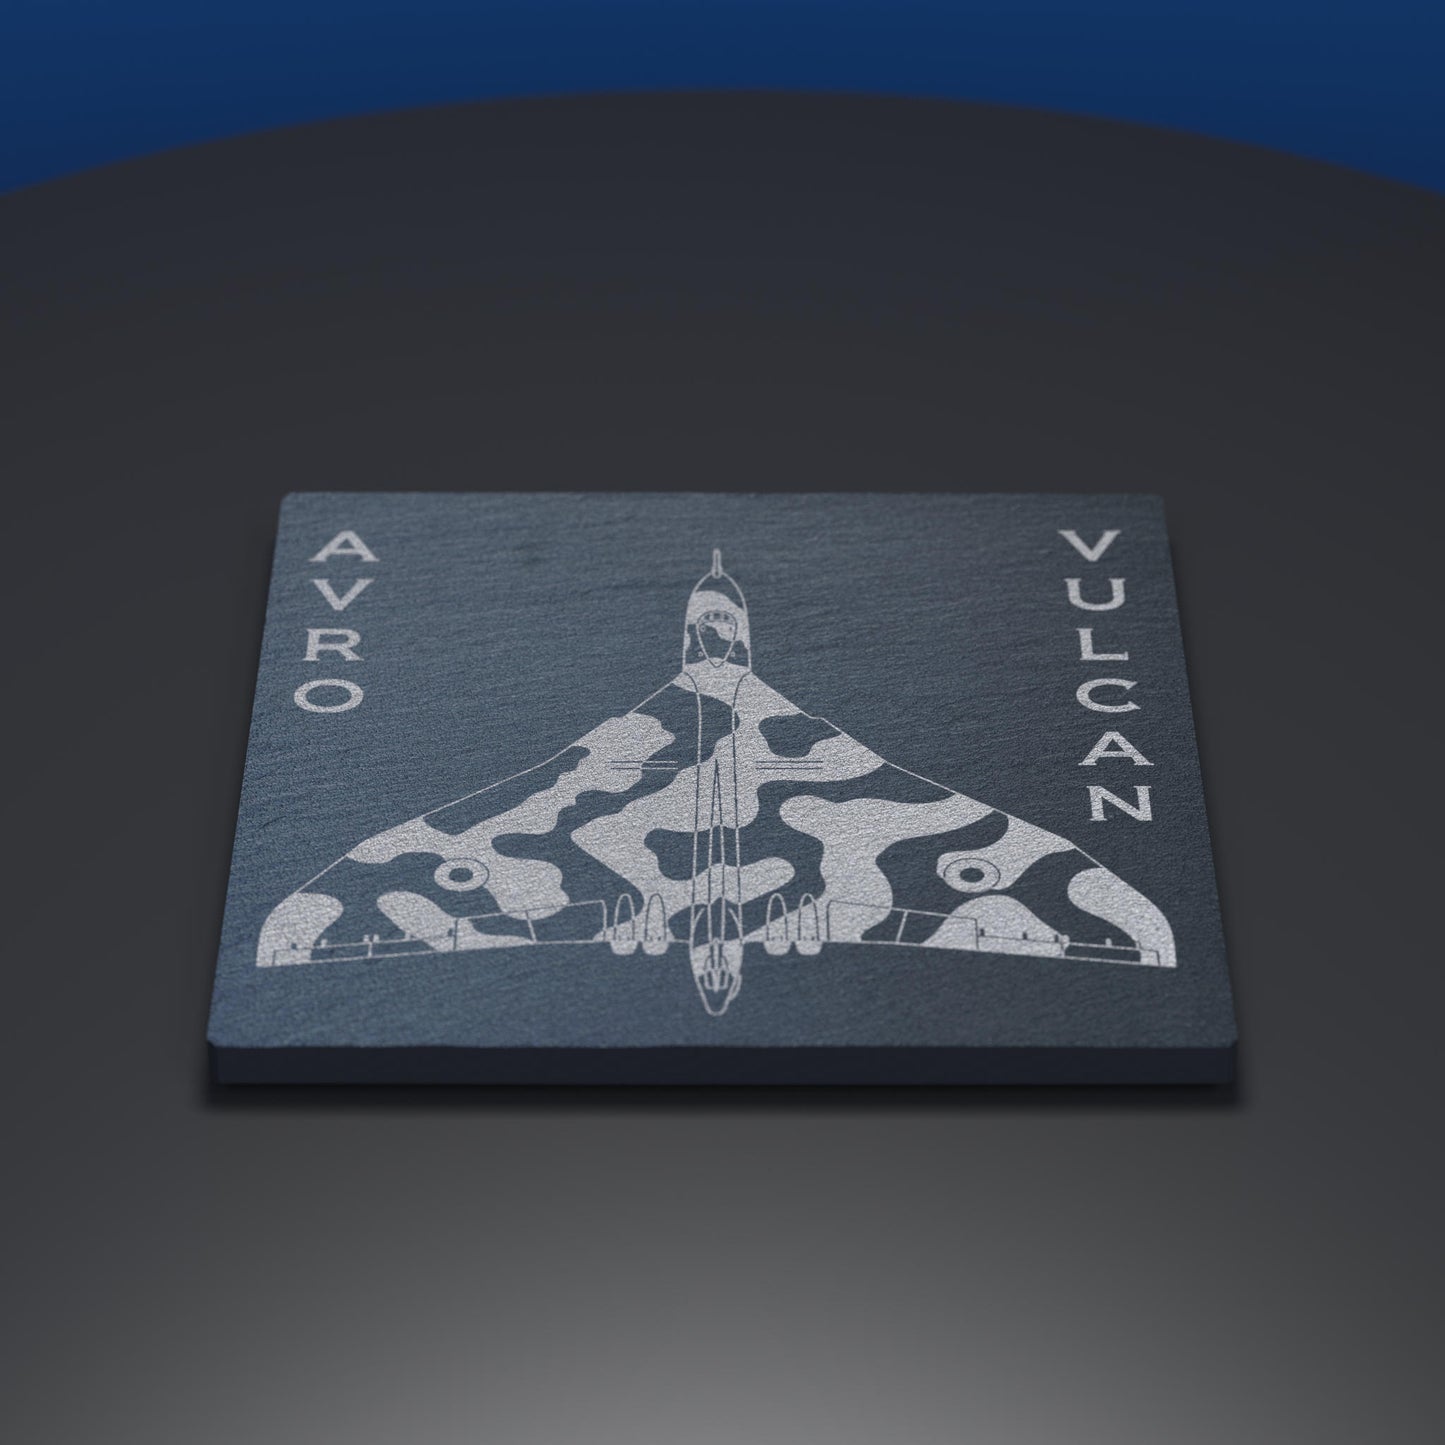 Slate coaster engraved with Avro Vulcan XH558